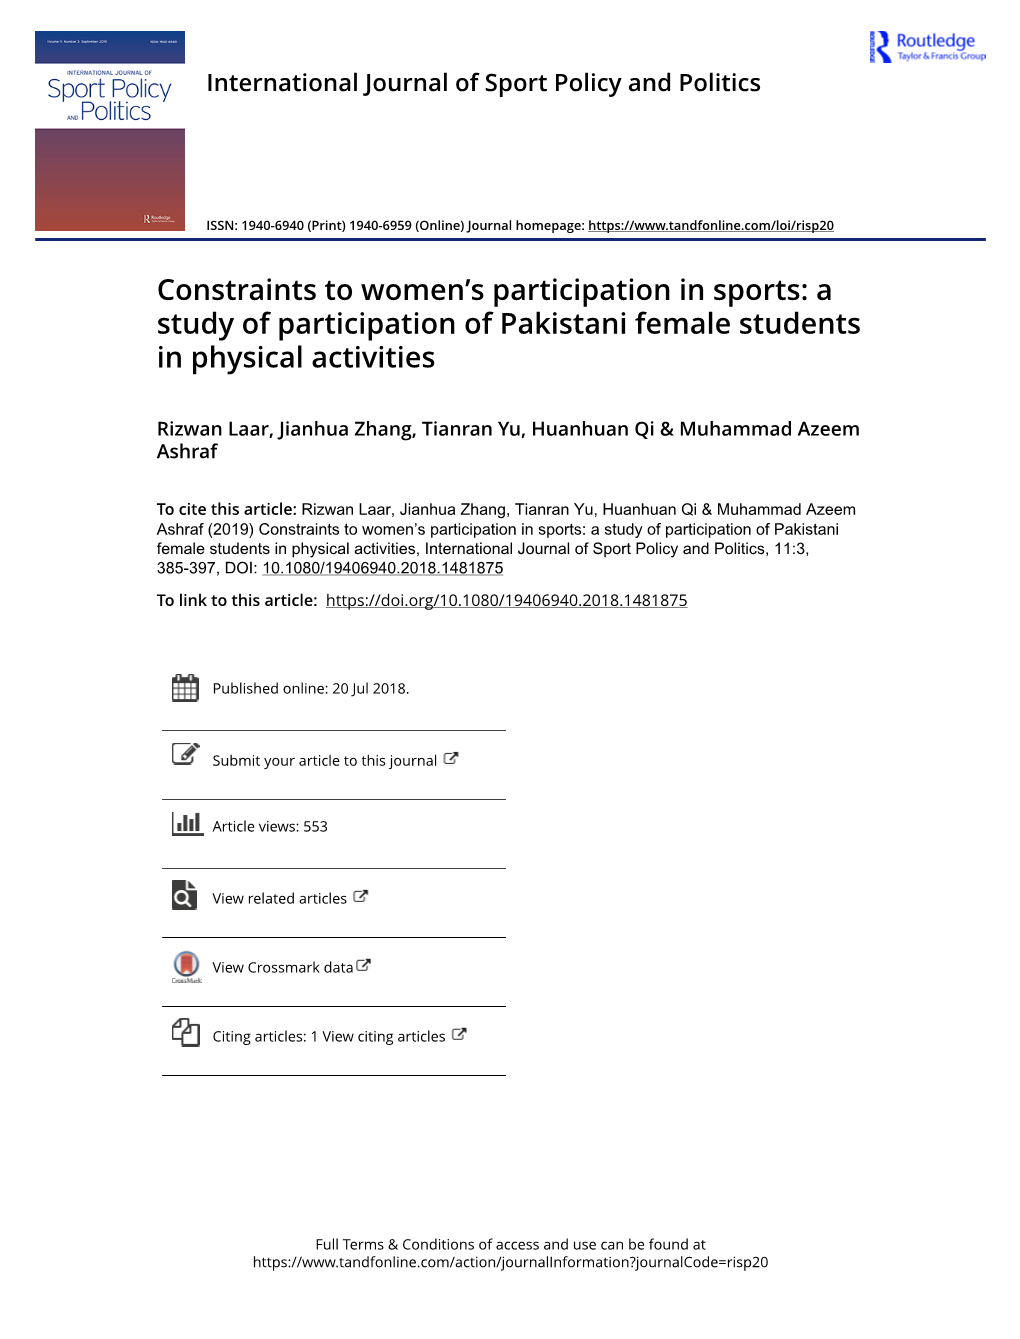 A Study of Participation of Pakistani Female Students in Physical Activities